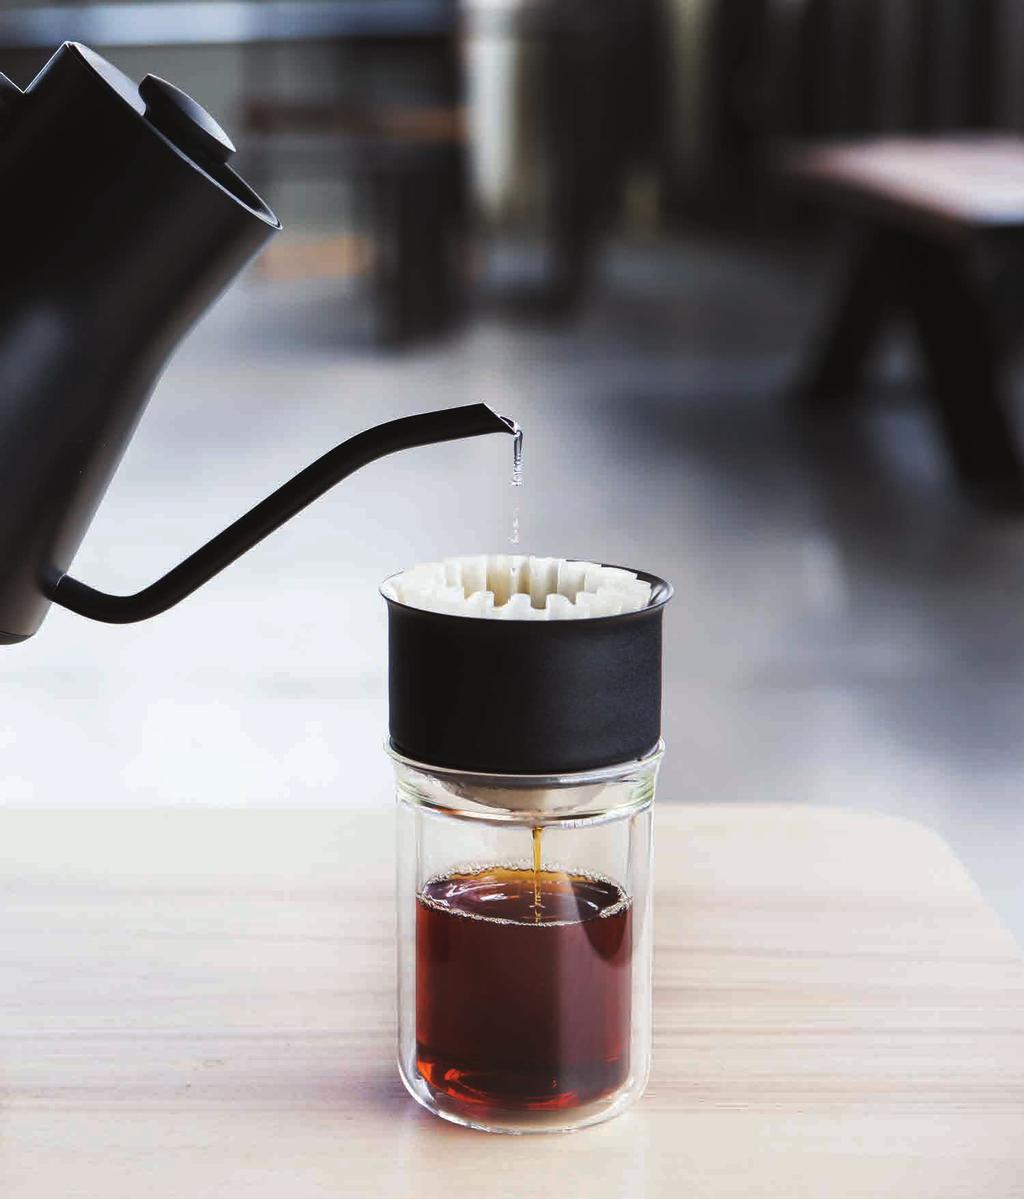 Stagg [X] and [XF] Pour-Over Drippers Through vacuum insulation, steep slopes, and a unique hole and bump pattern, our drippers are designed for a more consistent extraction with each brew.